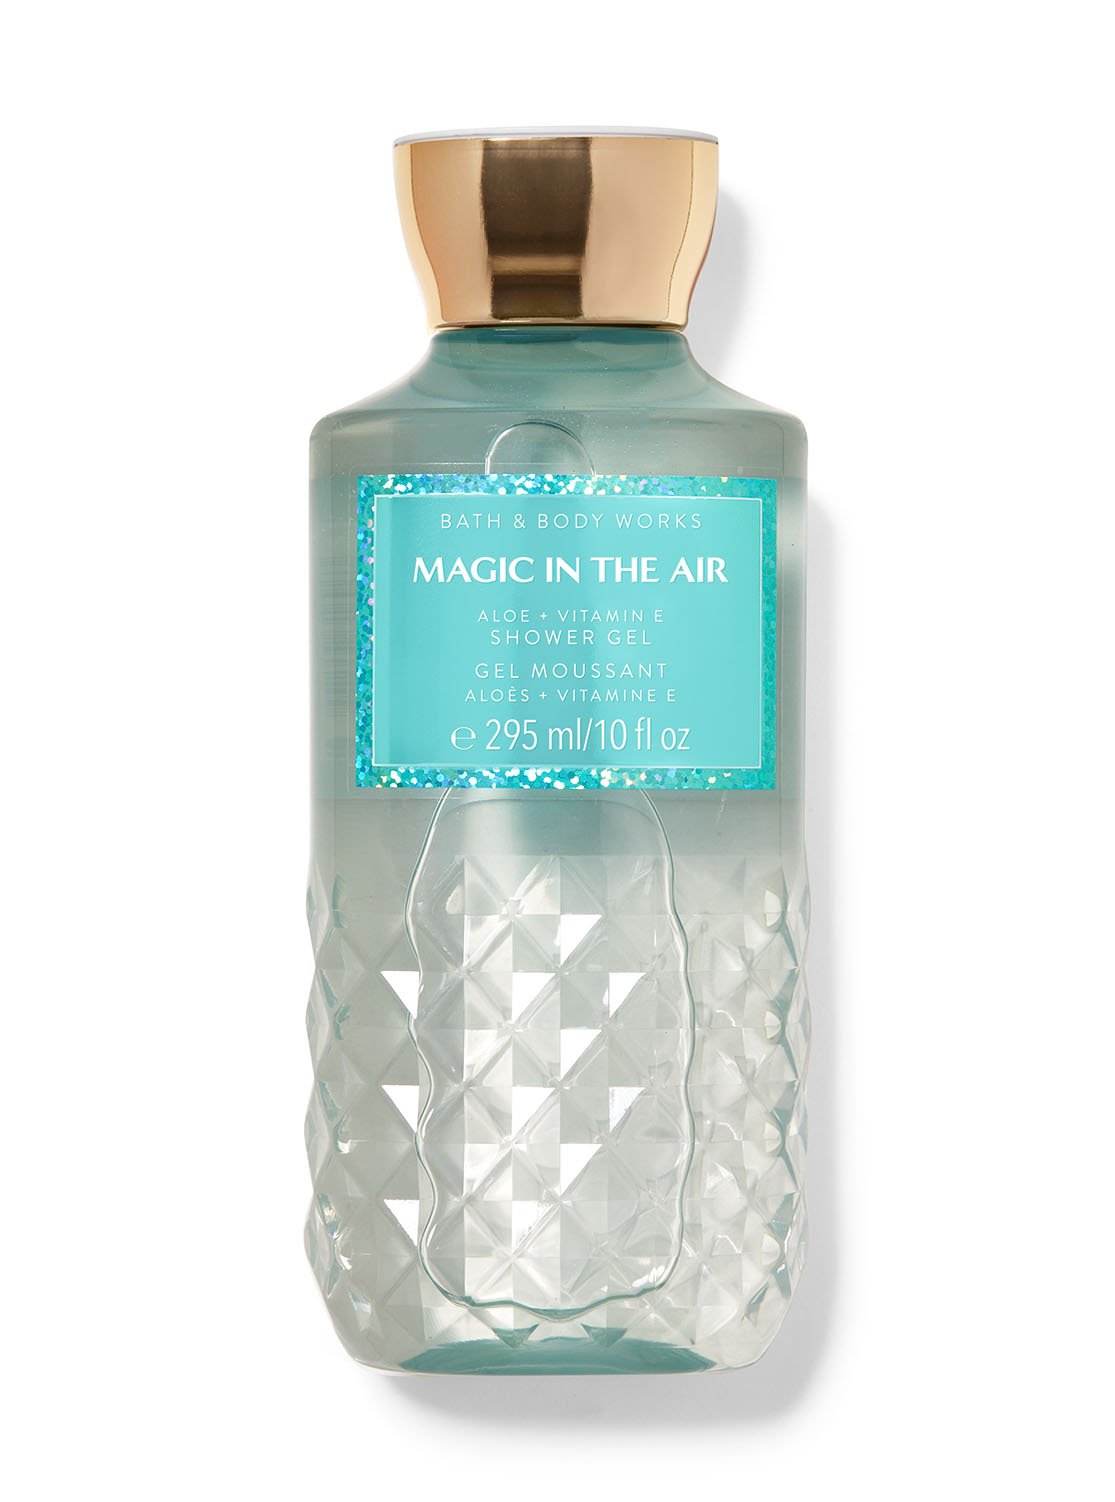 Magic in the Air Shower Gel | Bath and Body Works